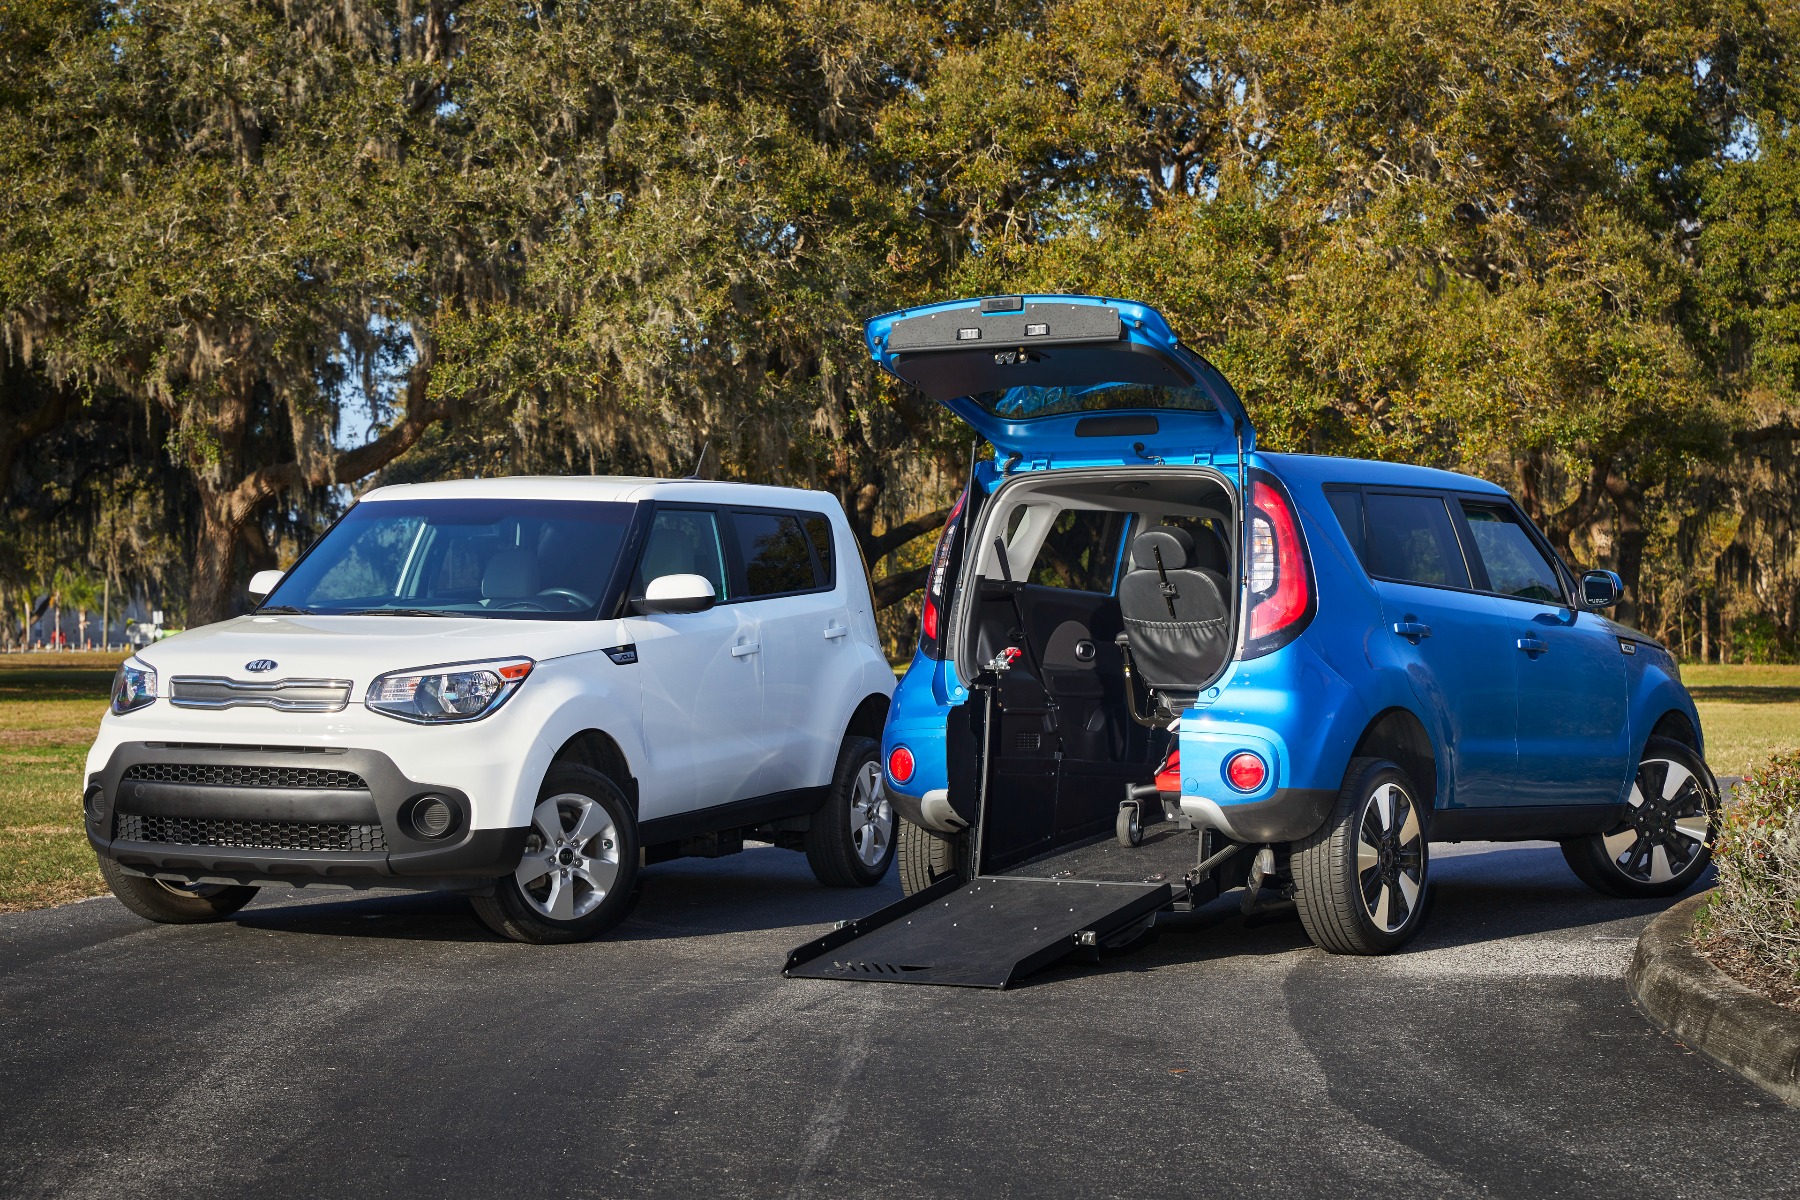 Two Kia Soul SUVs parked with trees in the background.